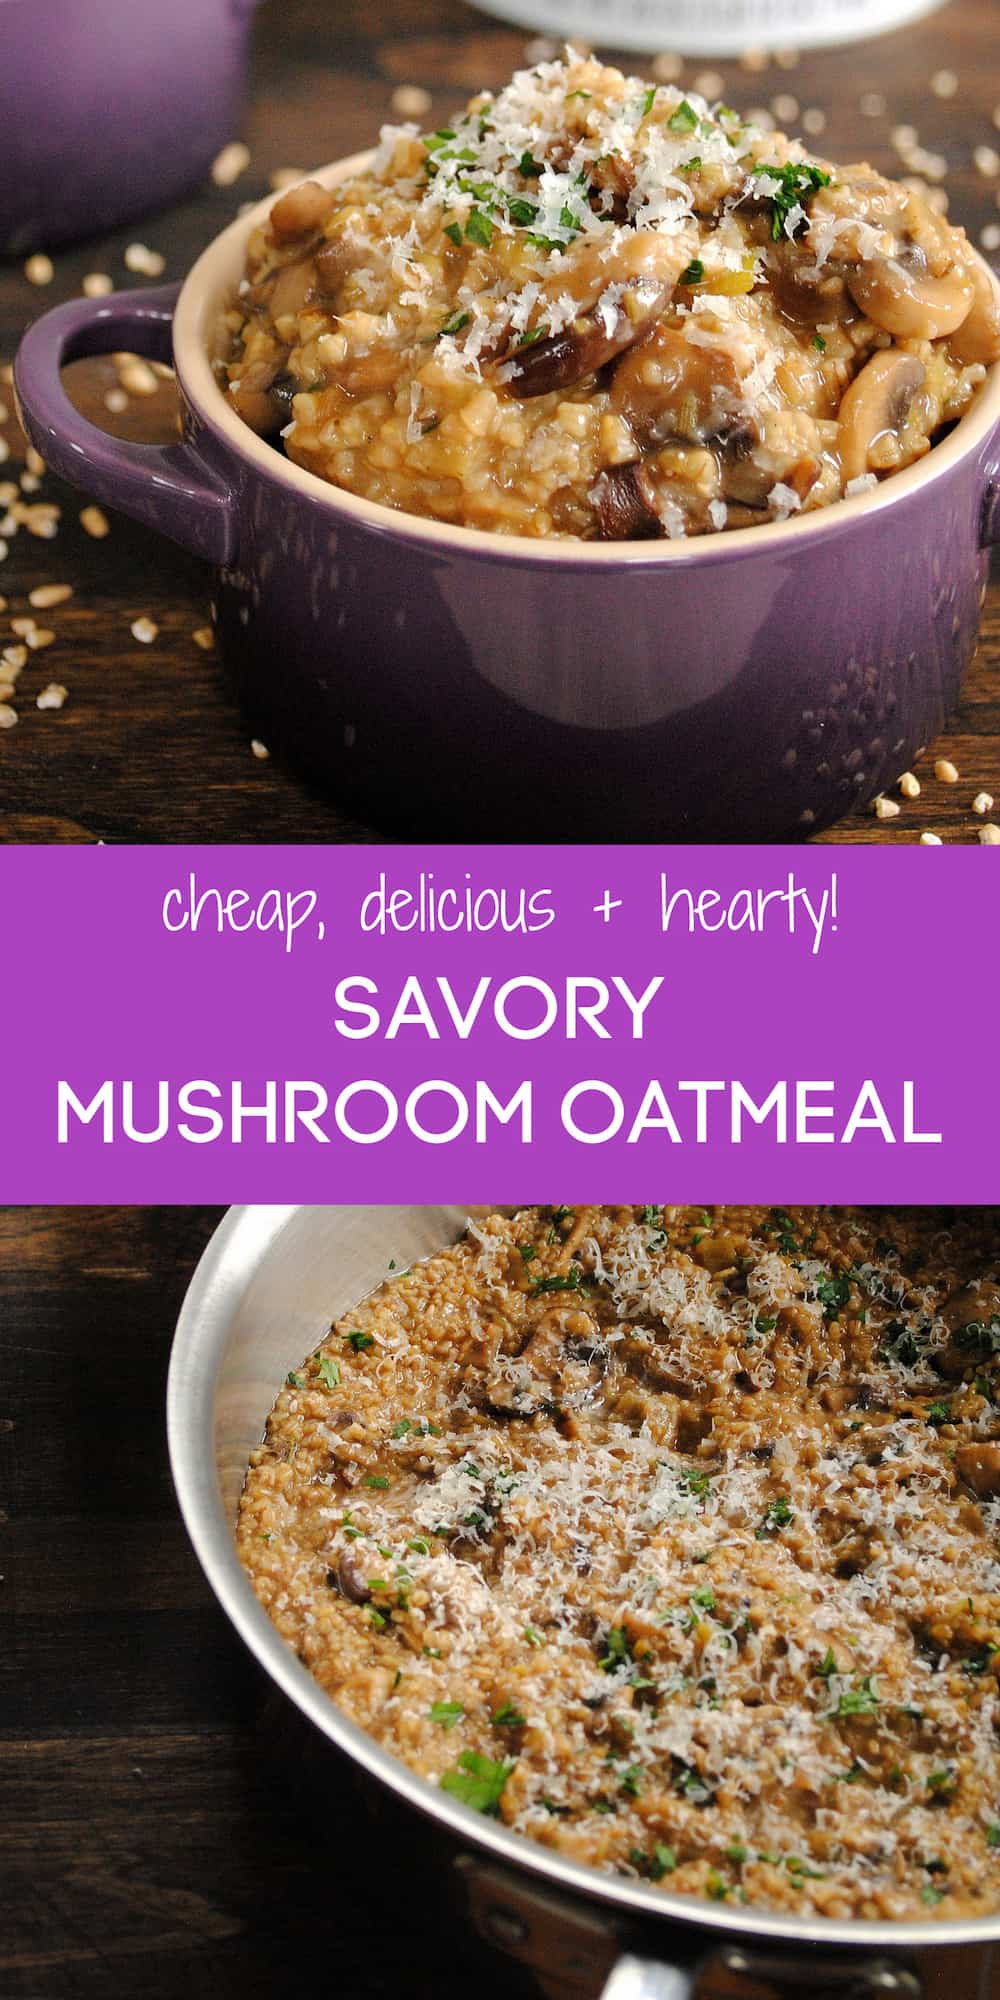 Collage of images of oatmeal for dinner with overlay: cheap, delicious + hearty! SAVORY MUSHROOM OATMEAL.